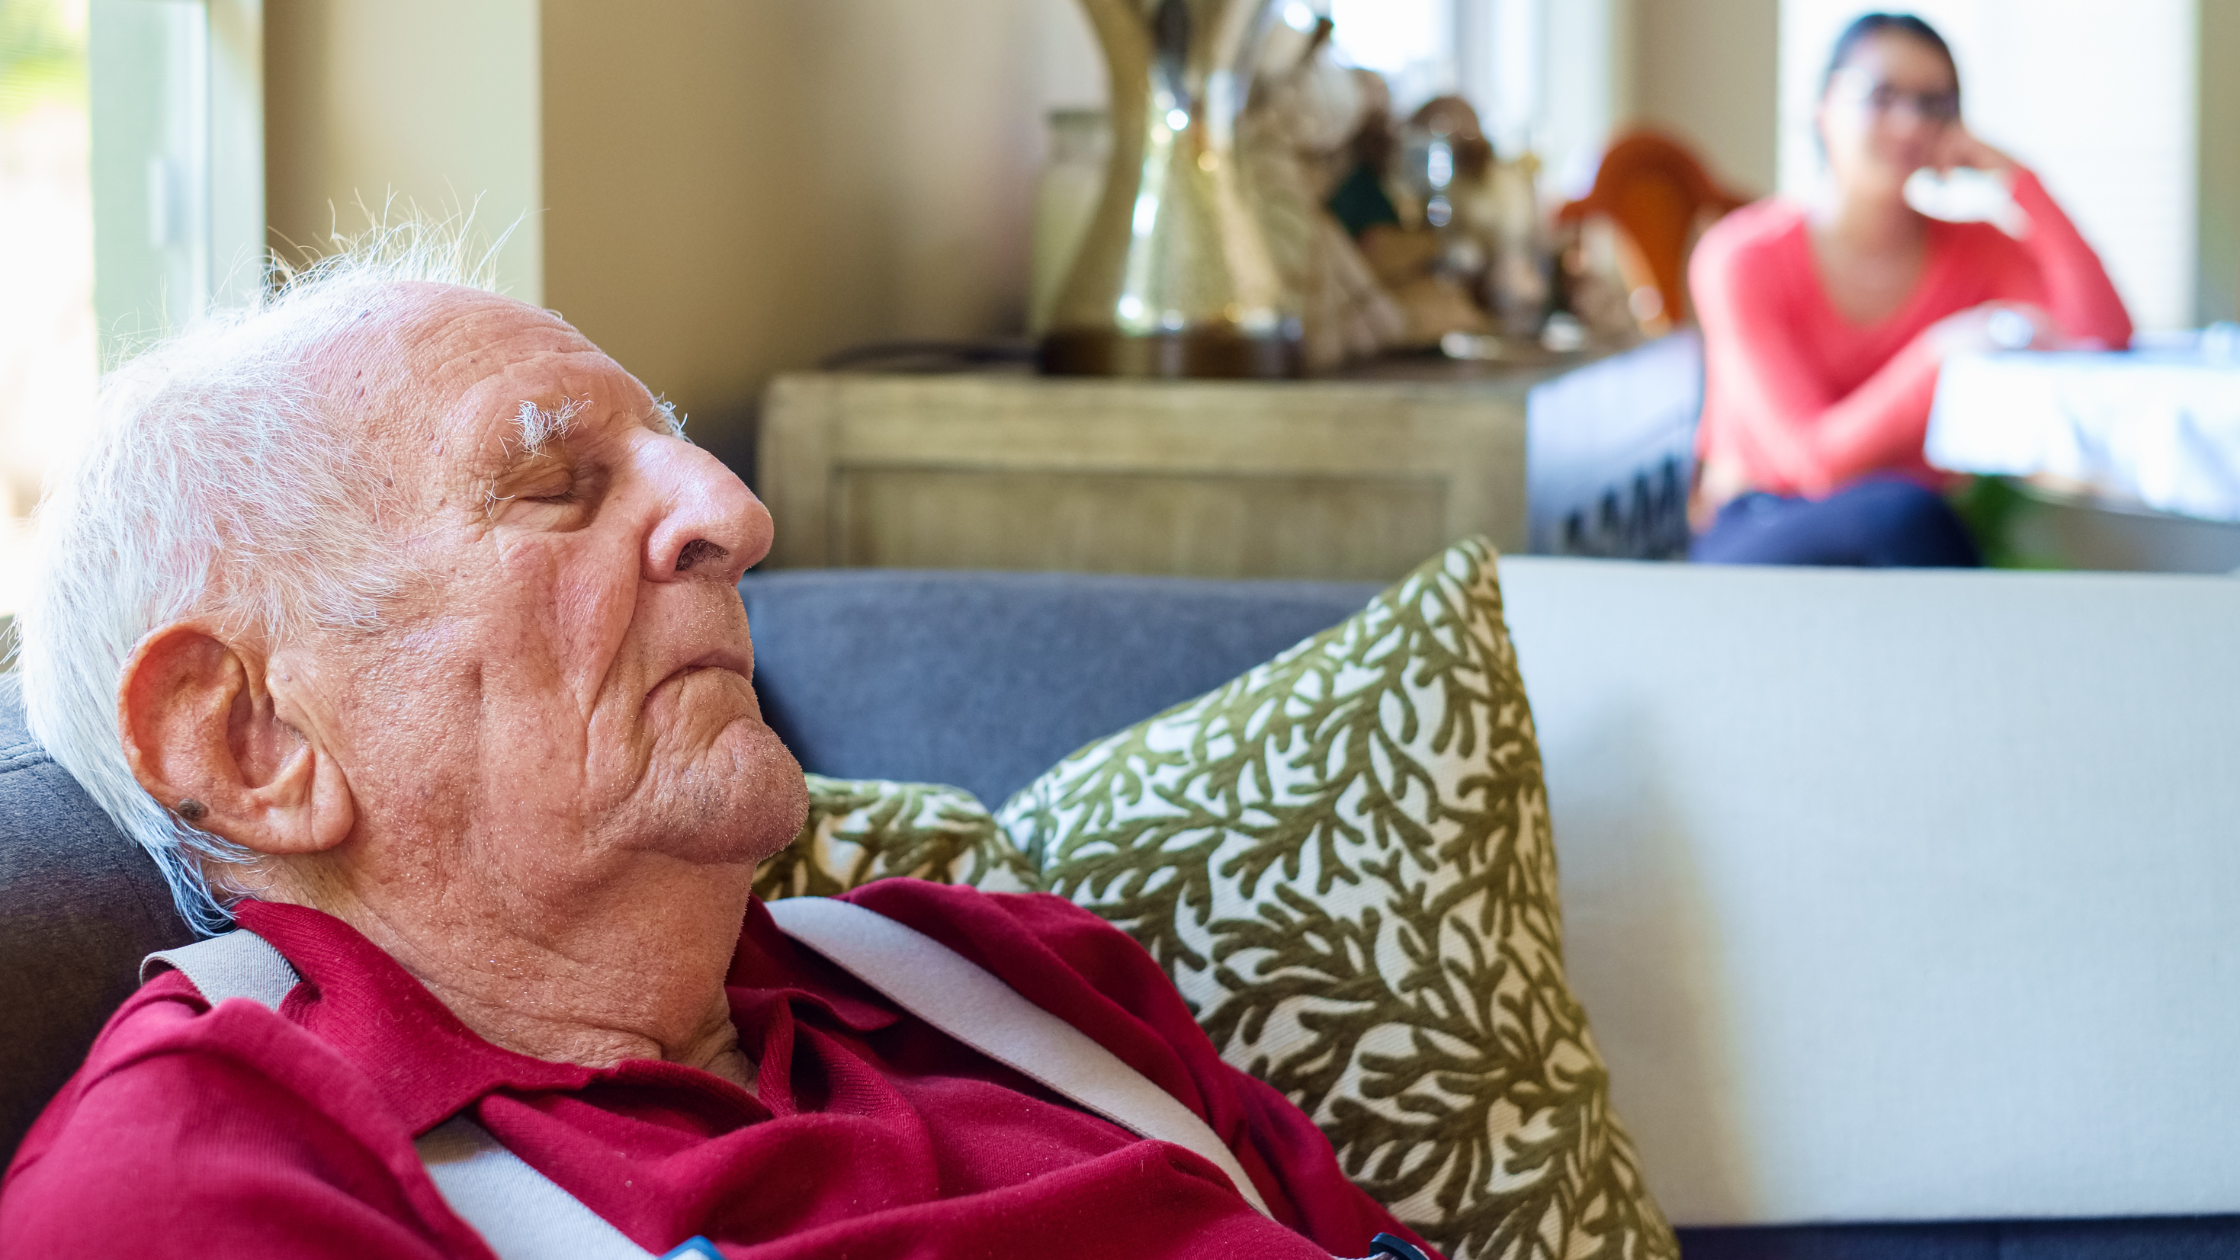 senior sleeps on the couch while family visits in the next room